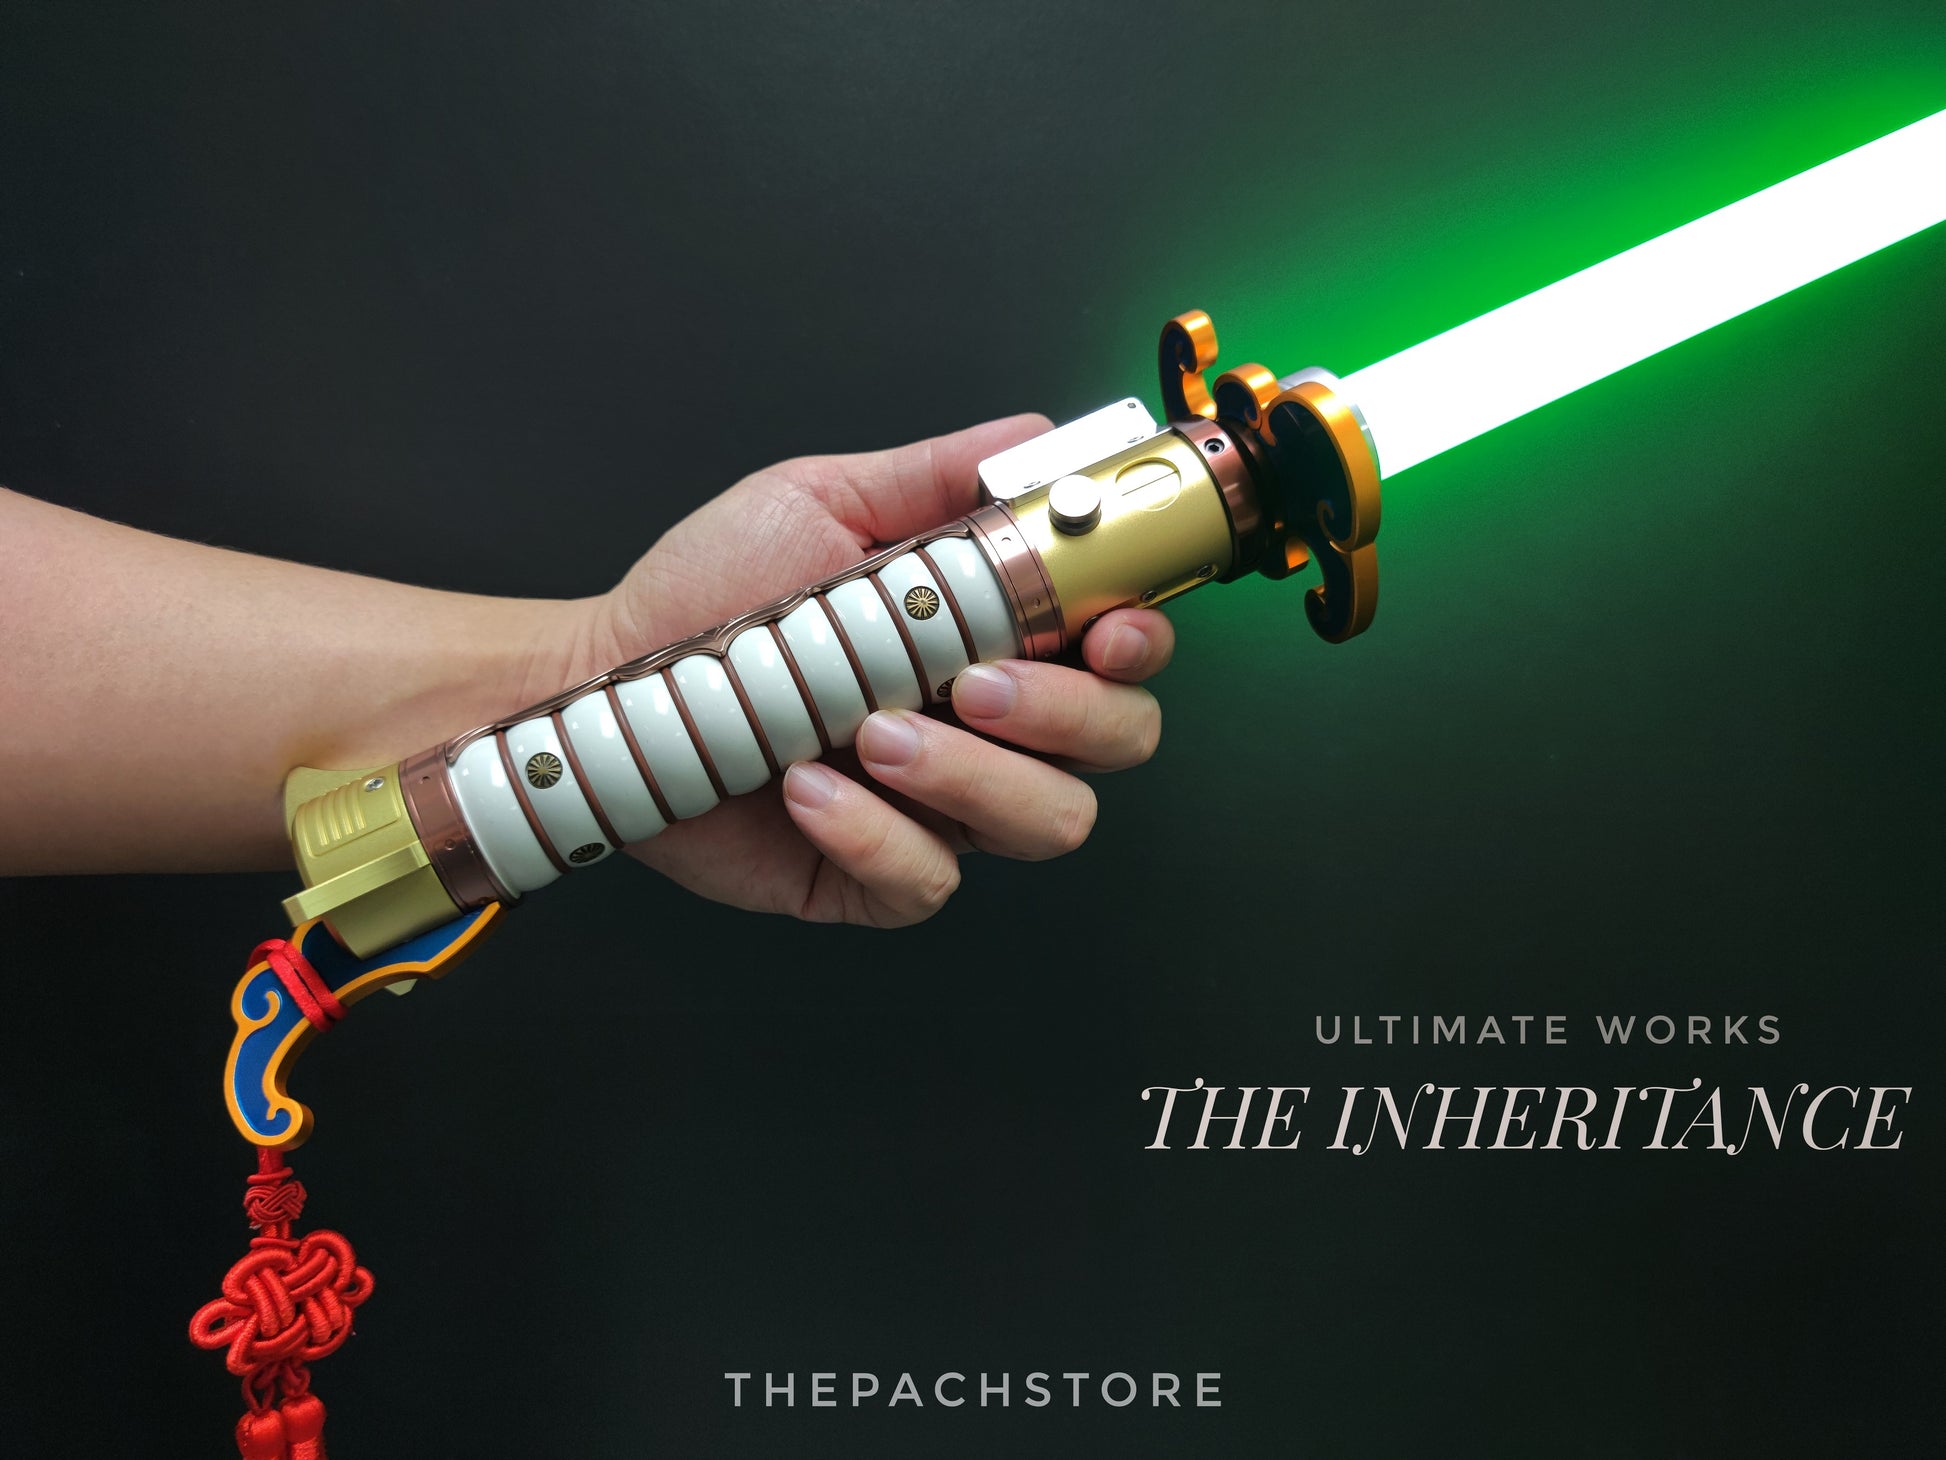 Buy realistic star wars lightsabers from ultimate works